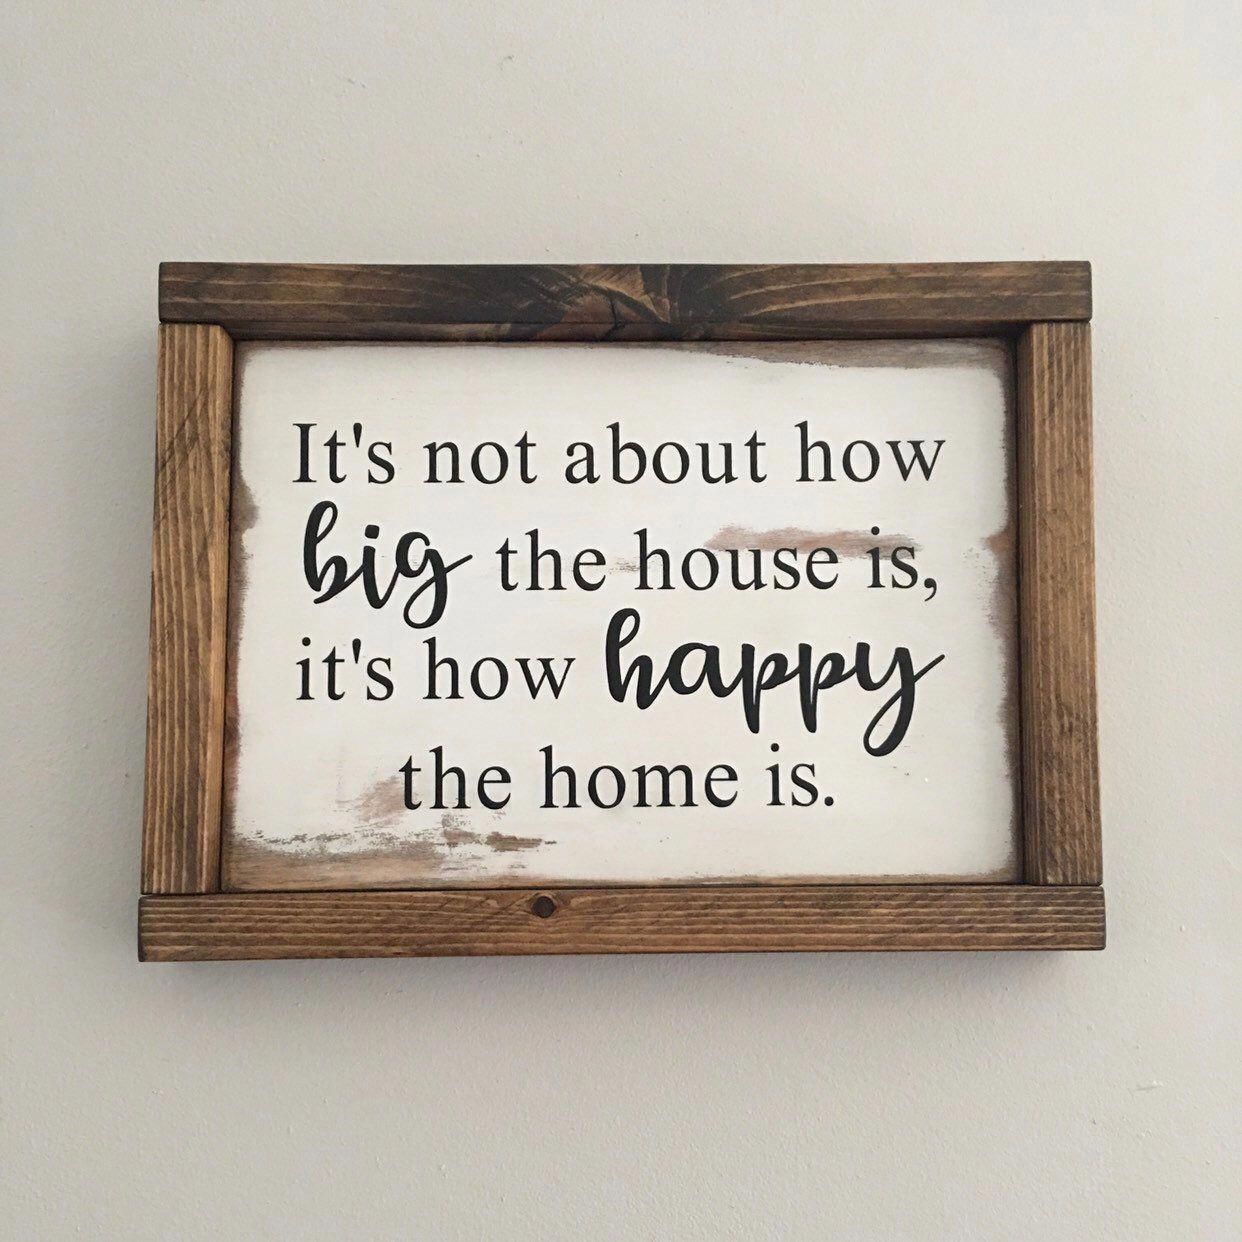 Rustic Wood How Happy the Home is sign - Home sign, Rustic Farmhouse, Rustic Decor, Housewarming gift, Anniversary Gift -   20 home decor signs quote ideas